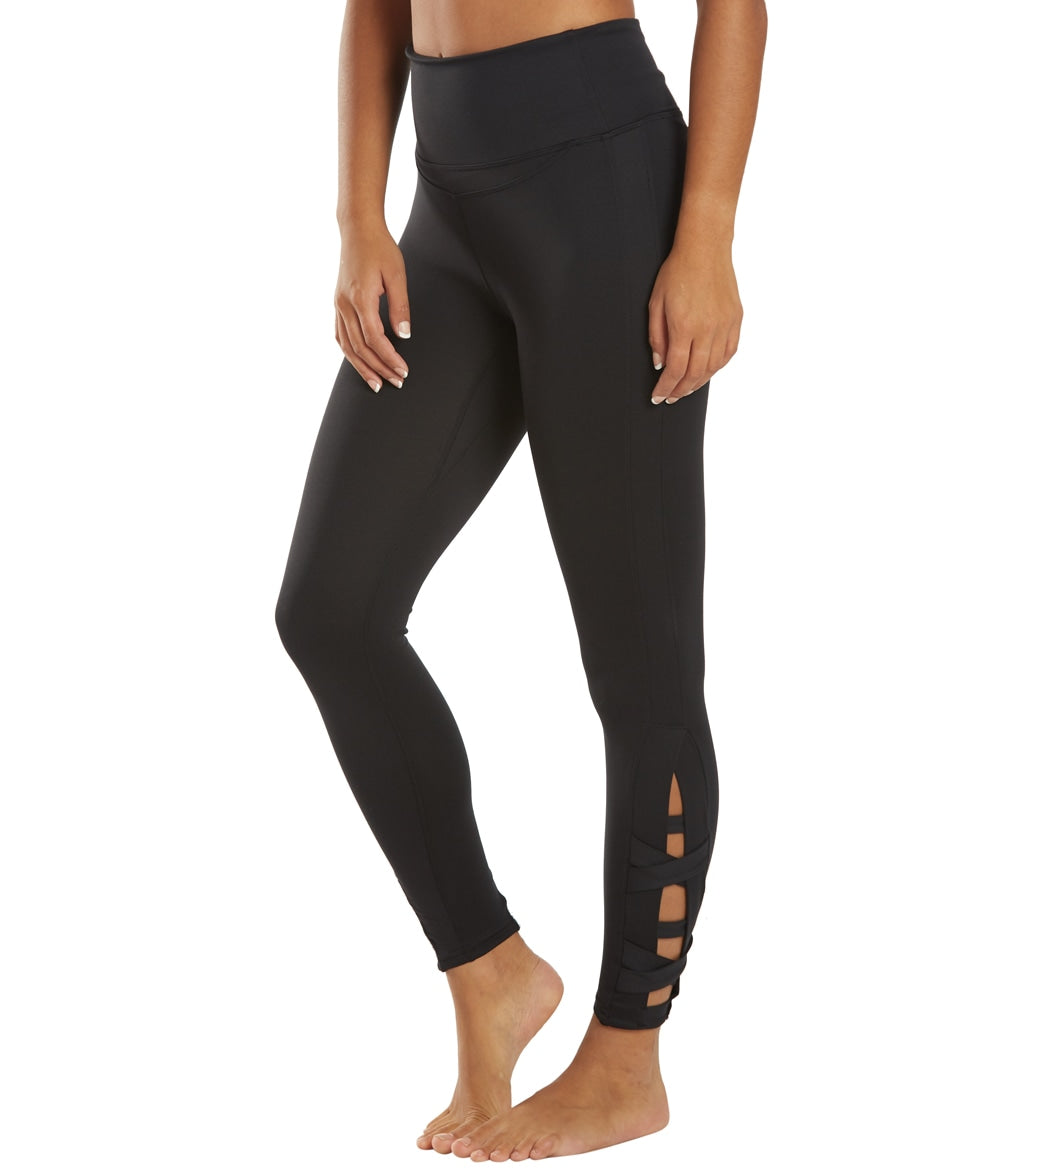 Free People Women's Small Movement Black Leggings - $32 - From Madi